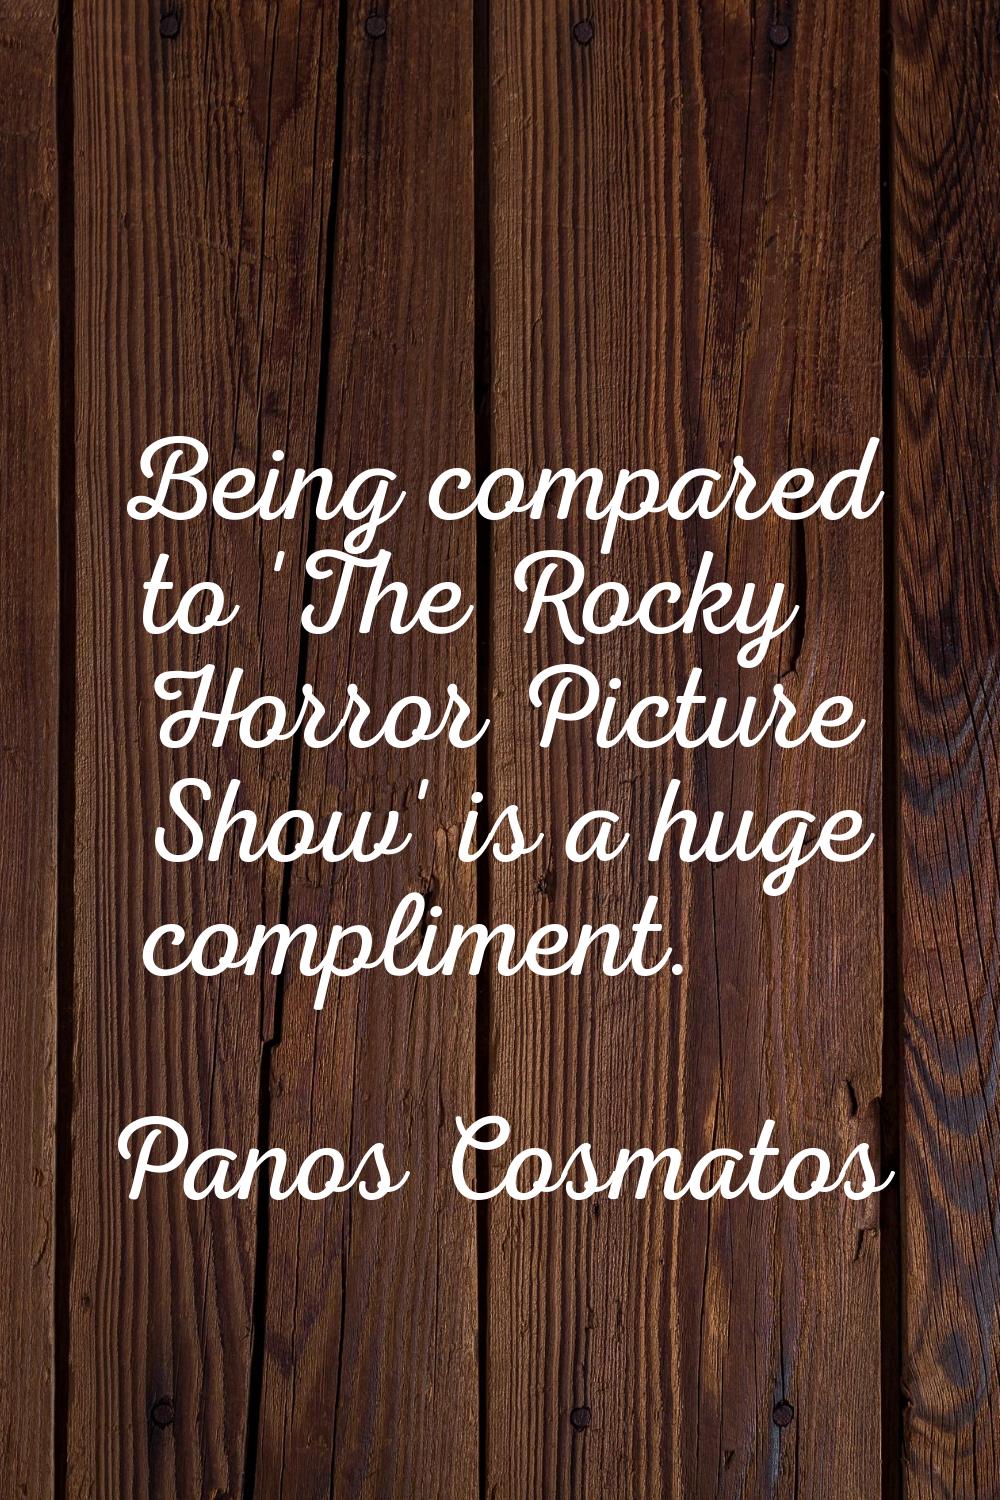 Being compared to 'The Rocky Horror Picture Show' is a huge compliment.